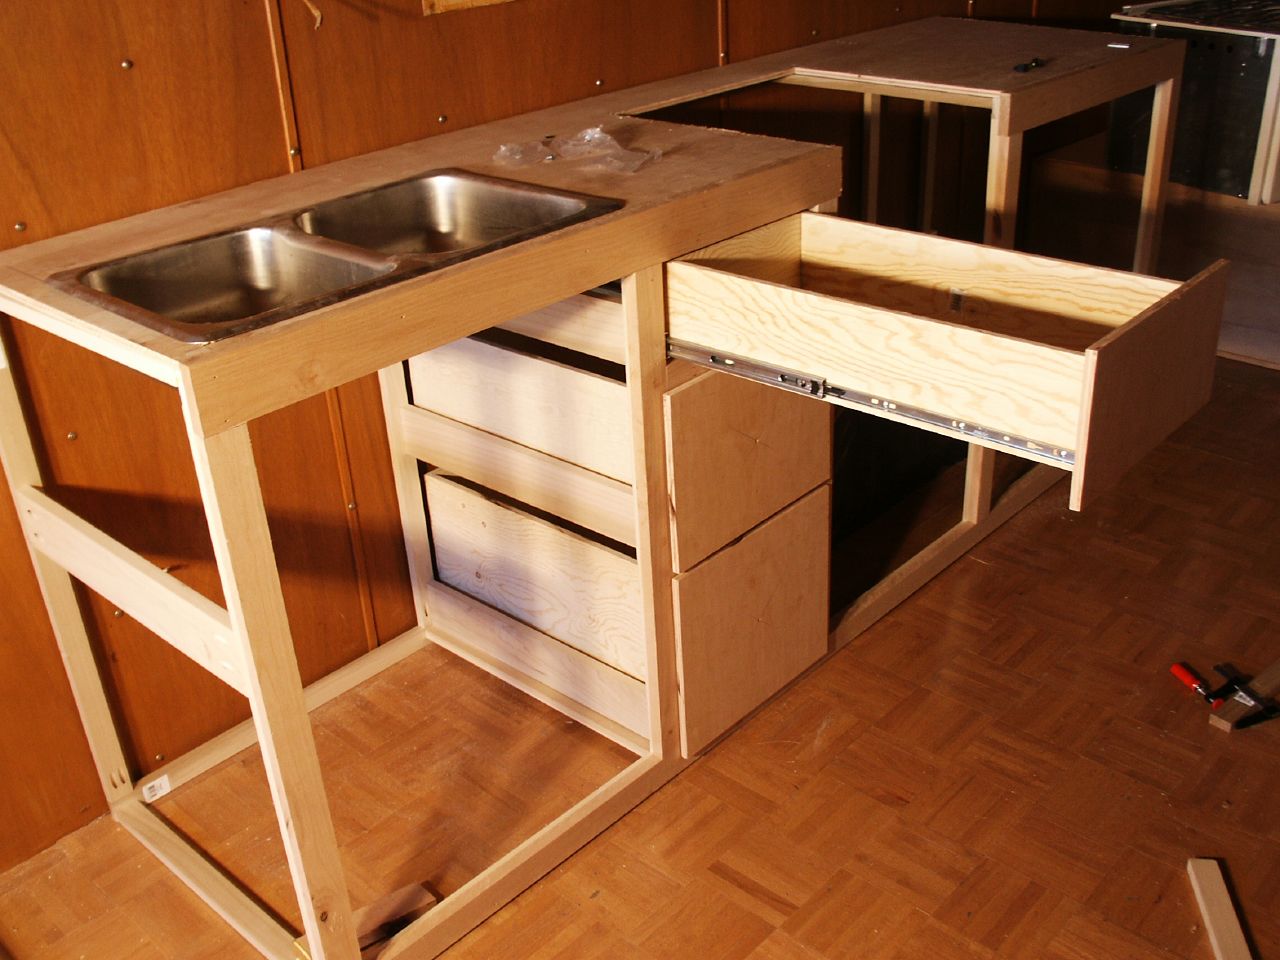 How to Install Drawer Slides on Your Old Drawers – 5 Easy Steps (with Pictures)